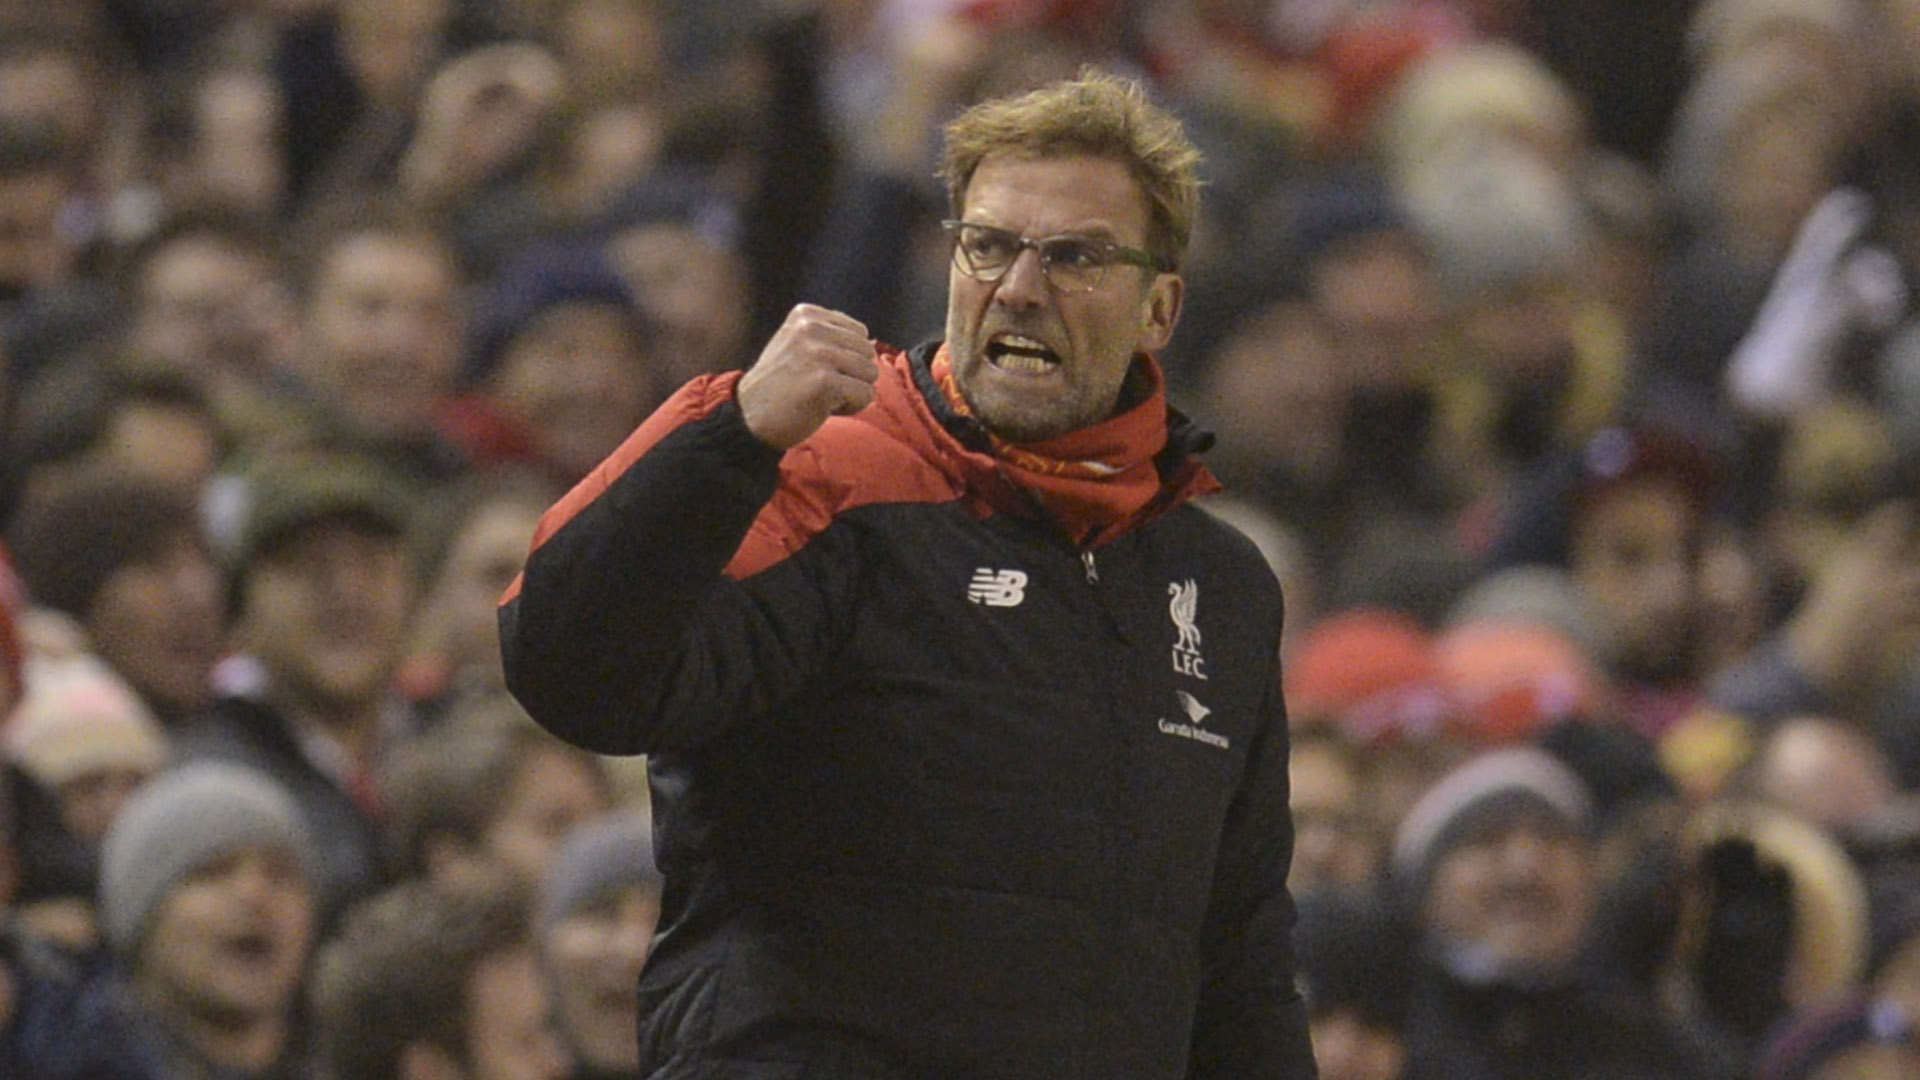 Liverpool's German manager Jurgen Klopp celebrates their late equalising goal to level the score at 2-2 the English Premier League football match between Liverpool and West Bromwich Albion at Anfield in Liverpool, northwest England, on December 13, 2015.  AFP PHOTO / OLI SCARFF RESTRICTED TO EDITORIAL USE. No use with unauthorized audio, video, data, fixture lists, club/league logos or 'live' services. Online in-match use limited to 75 images, no video emulation. No use in betting, games or single club/league/player publications. / AFP / OLI SCARFF        (Photo credit should read OLI SCARFF/AFP/Getty Images)